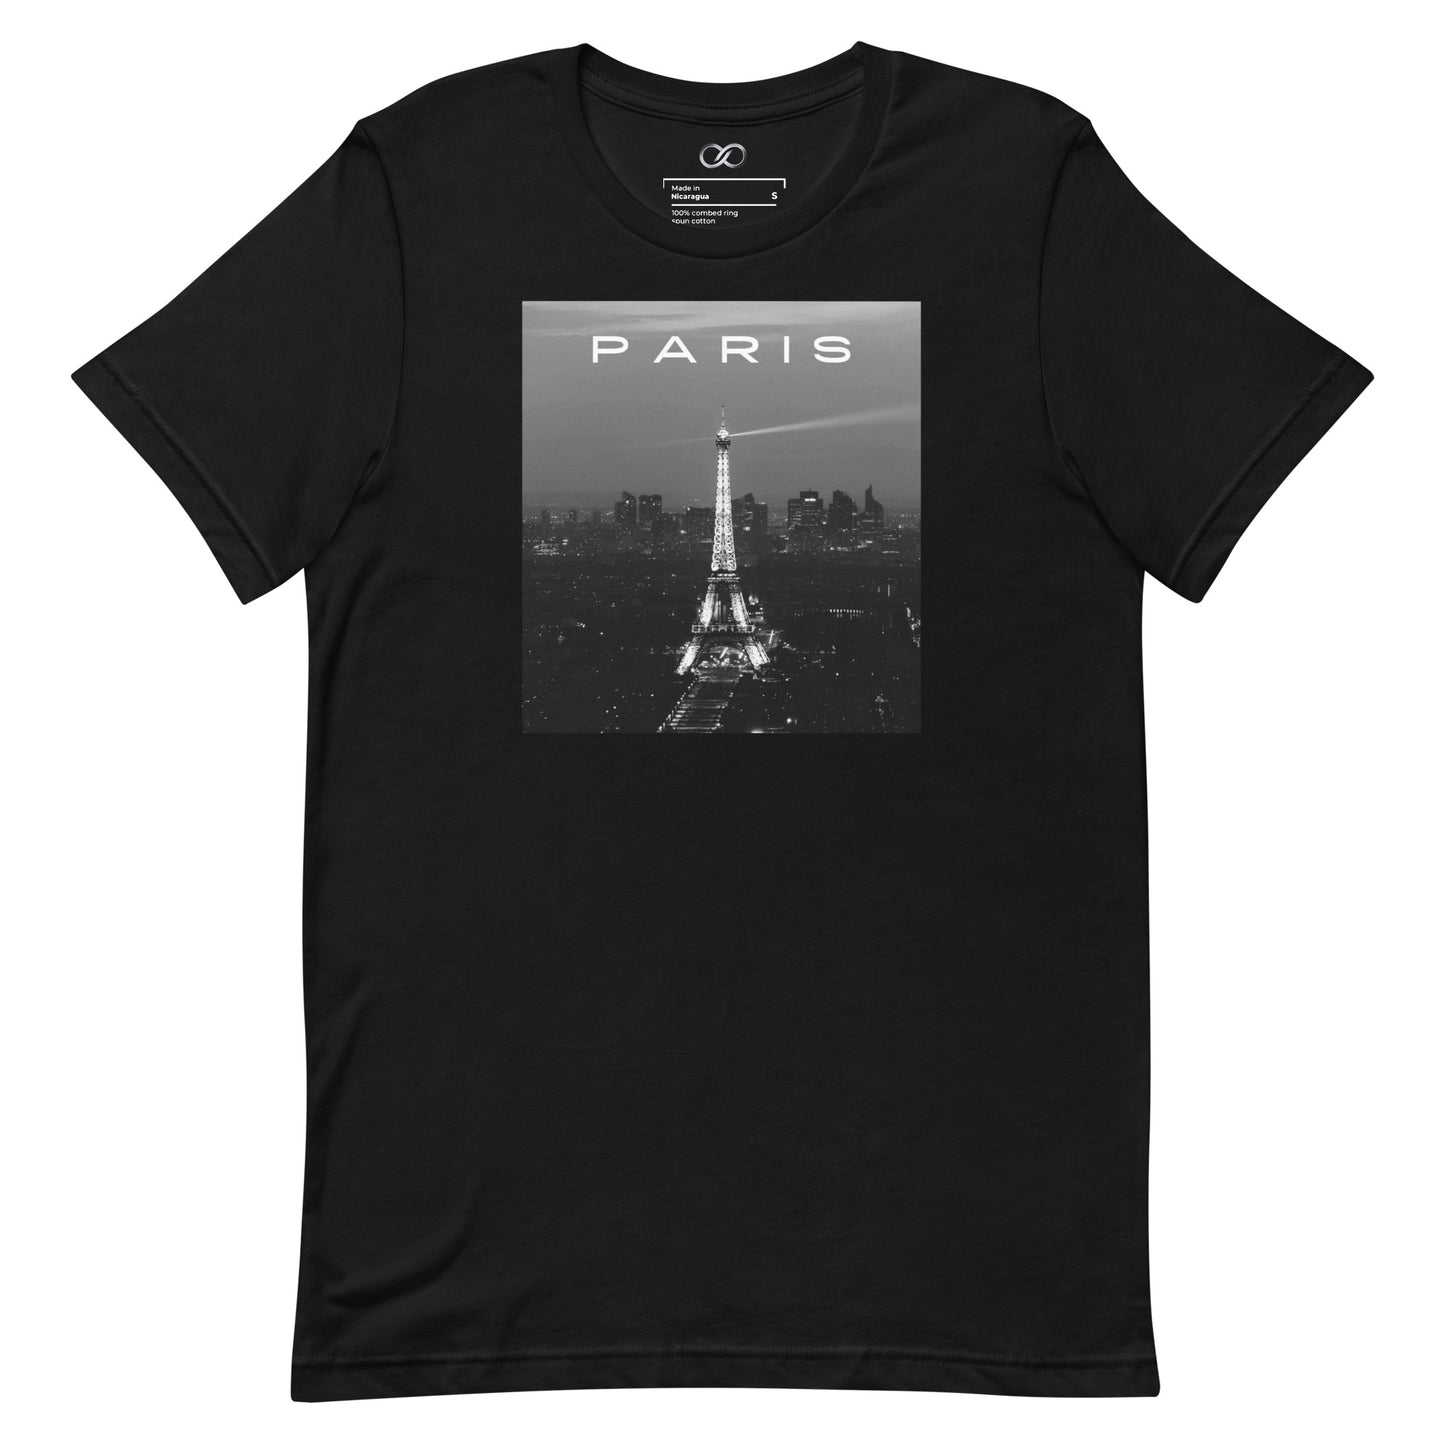 A black t-shirt laid flat showcasing a central photo print of the Eiffel Tower in Paris with a translucent white overlay text 'PARIS'.